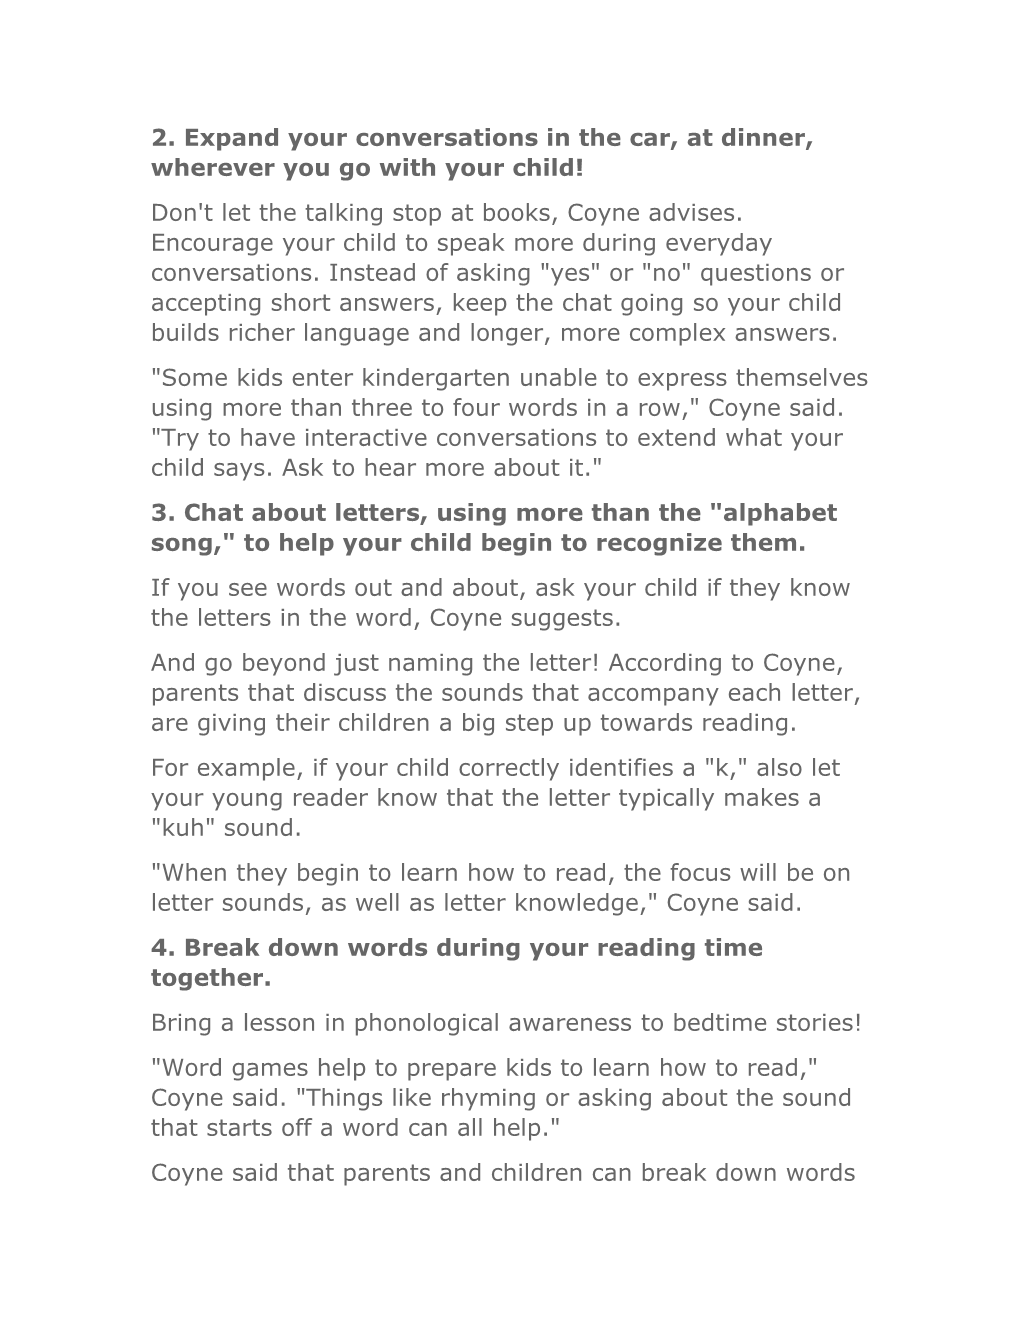 5 Reading Tips to Prepare Your Child for Kindergarten